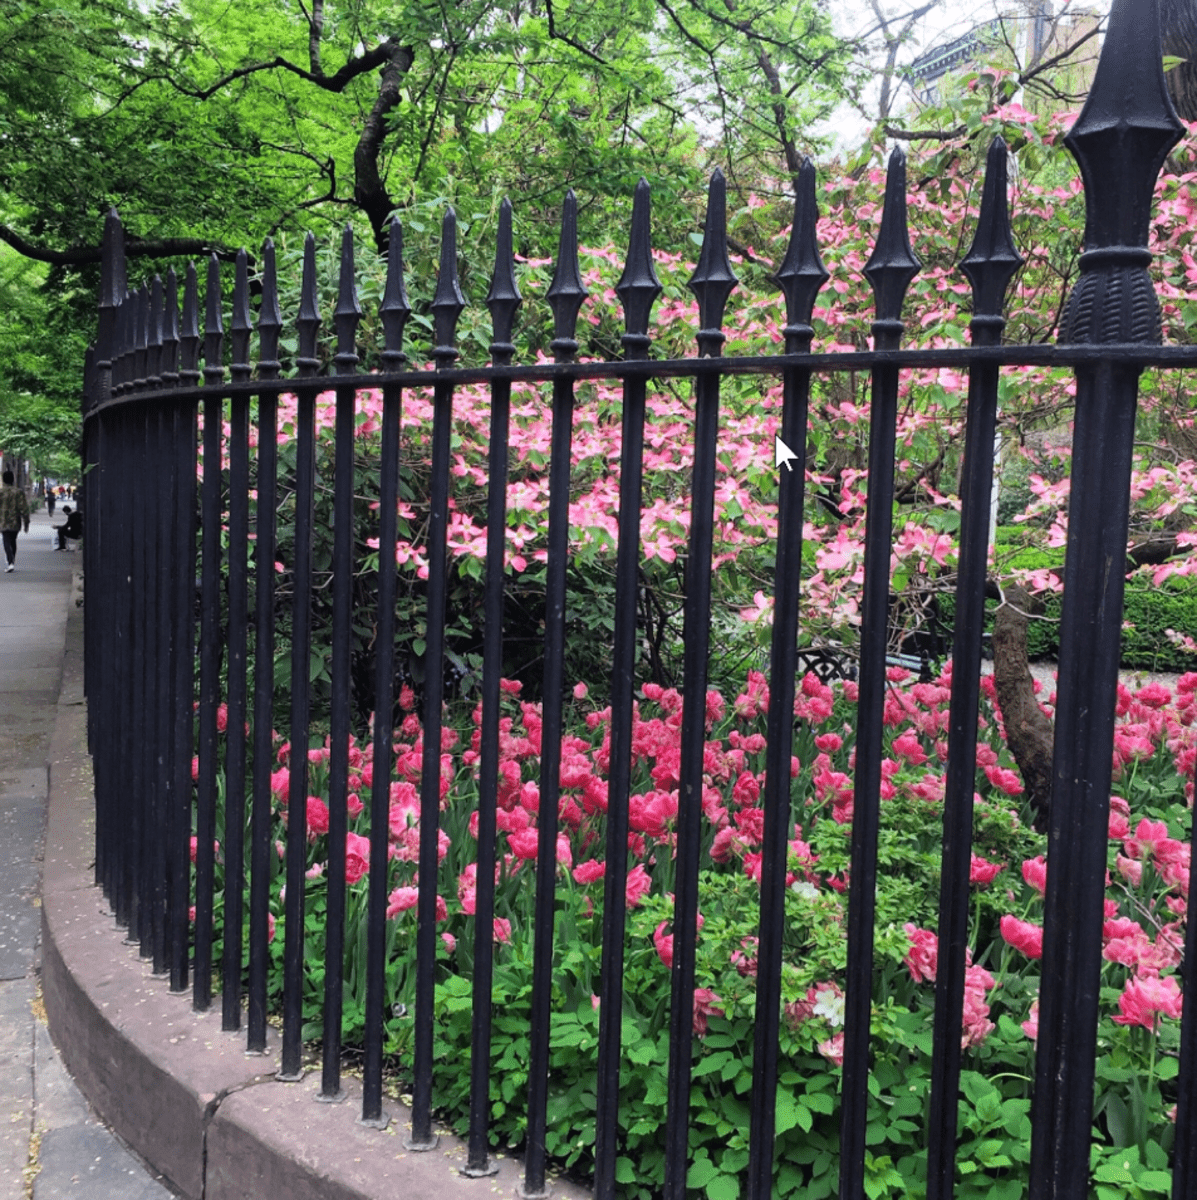 pink flowers behind wrought iron fencing